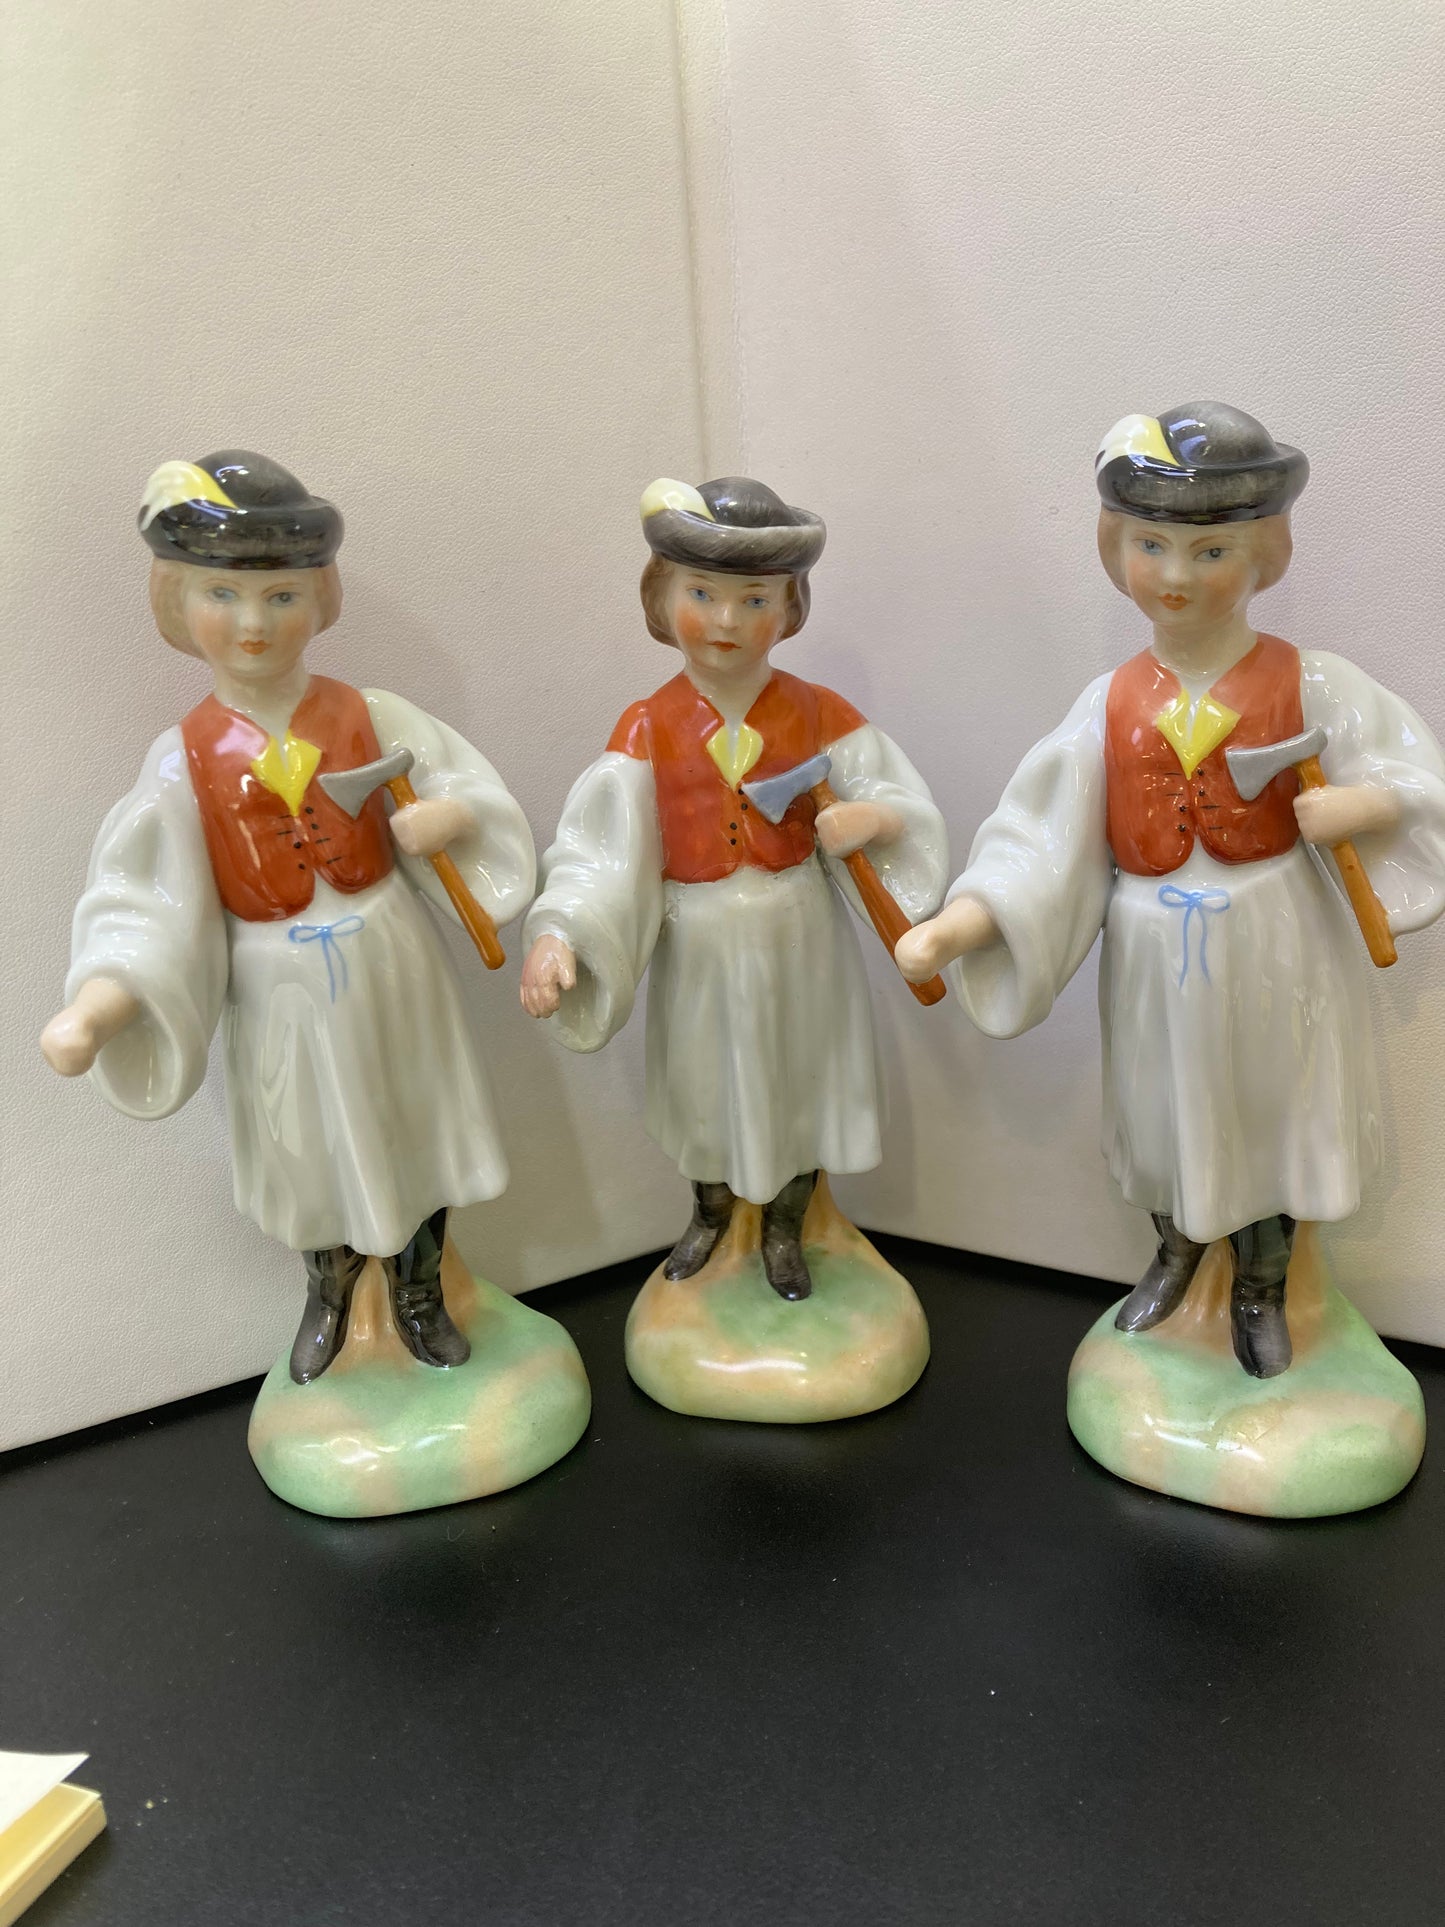 Herend porcelain figurines from Hungary, hand painted.